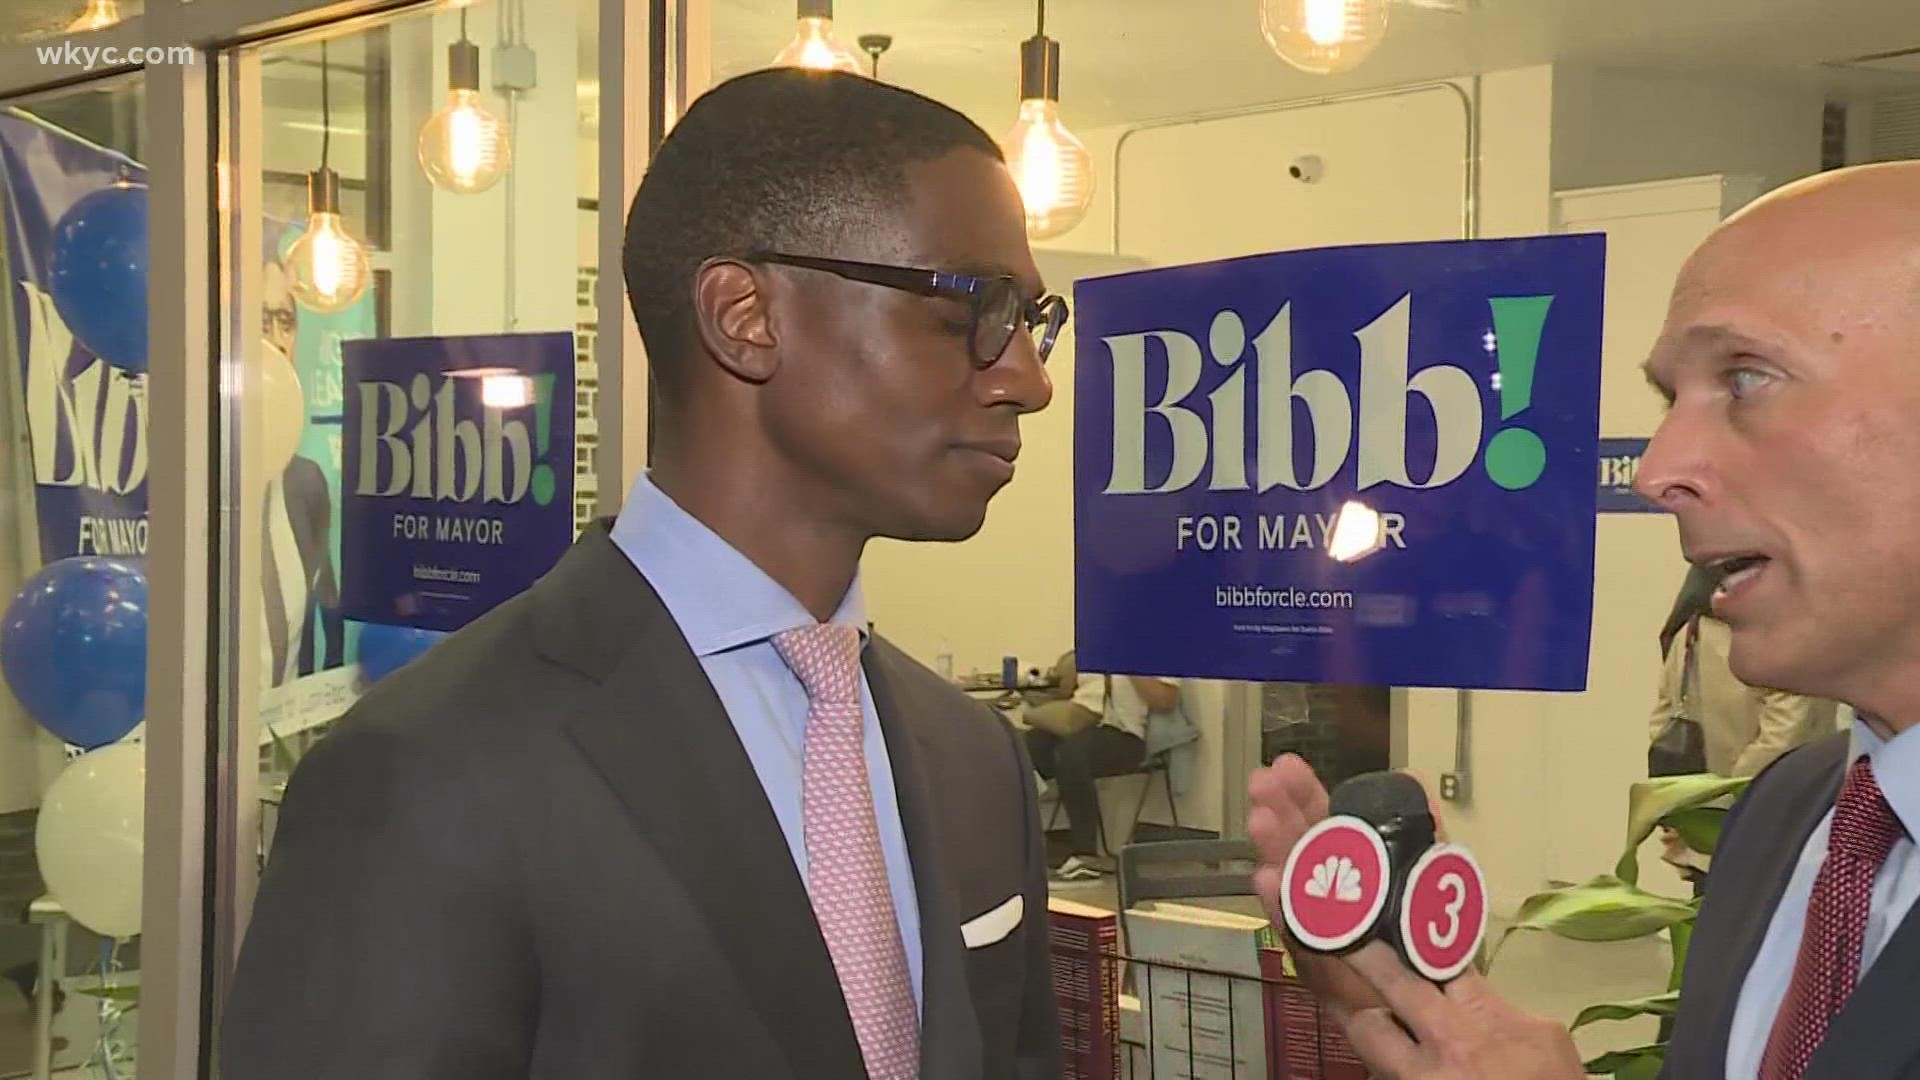 Justin Bibb and Kevin Kelley will move on to Cleveland's November Mayoral election.